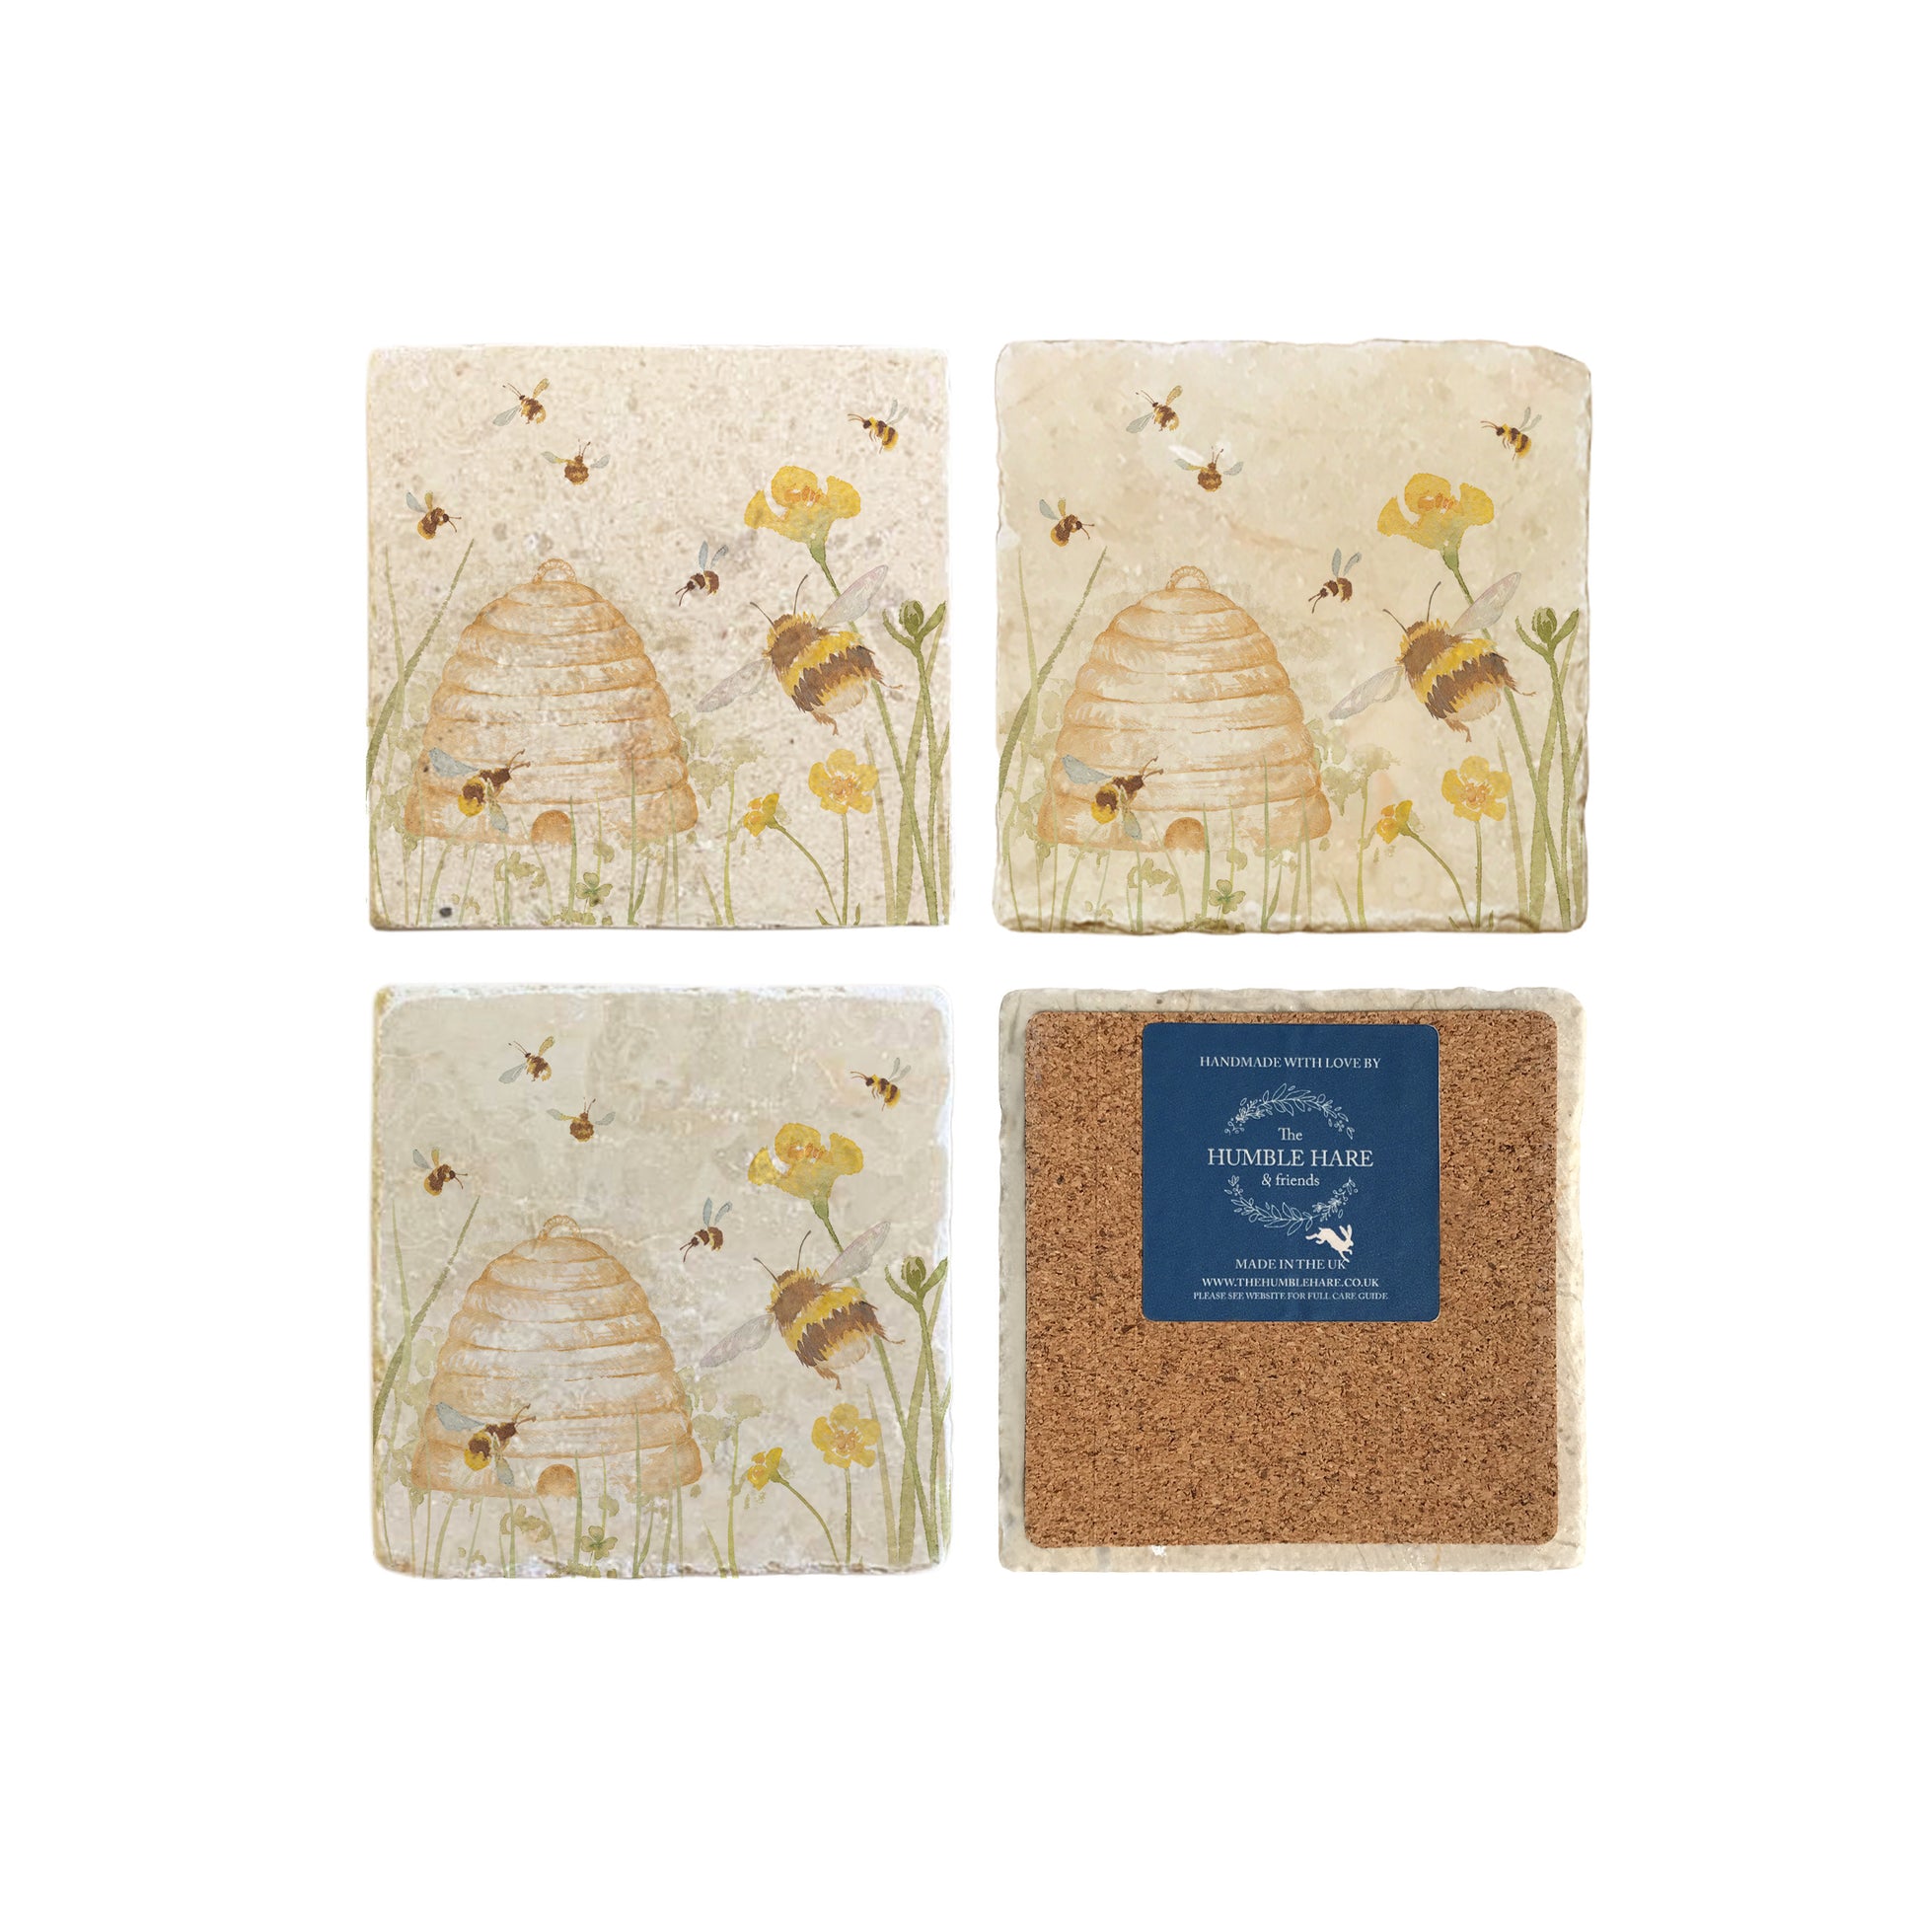  A set of 4 square marble coasters, featuring a watercolour design of bees and a beehive in a buttercup meadow. One coaster is flipped to show that the coasters are backed with cork.